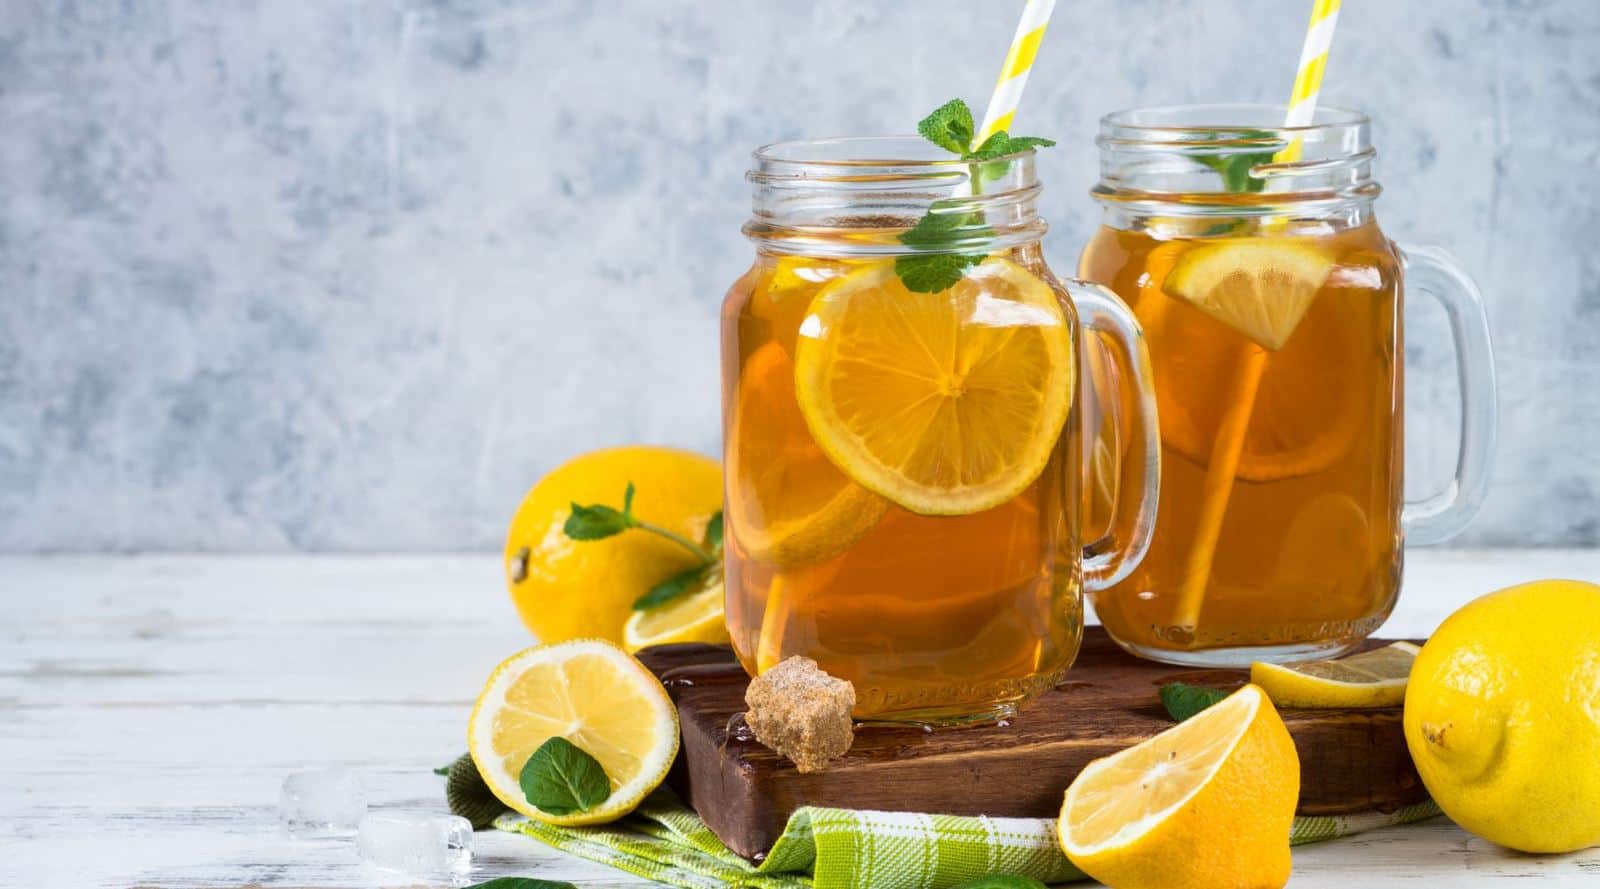 how to make iced tea with tea bags: step-by-step guide